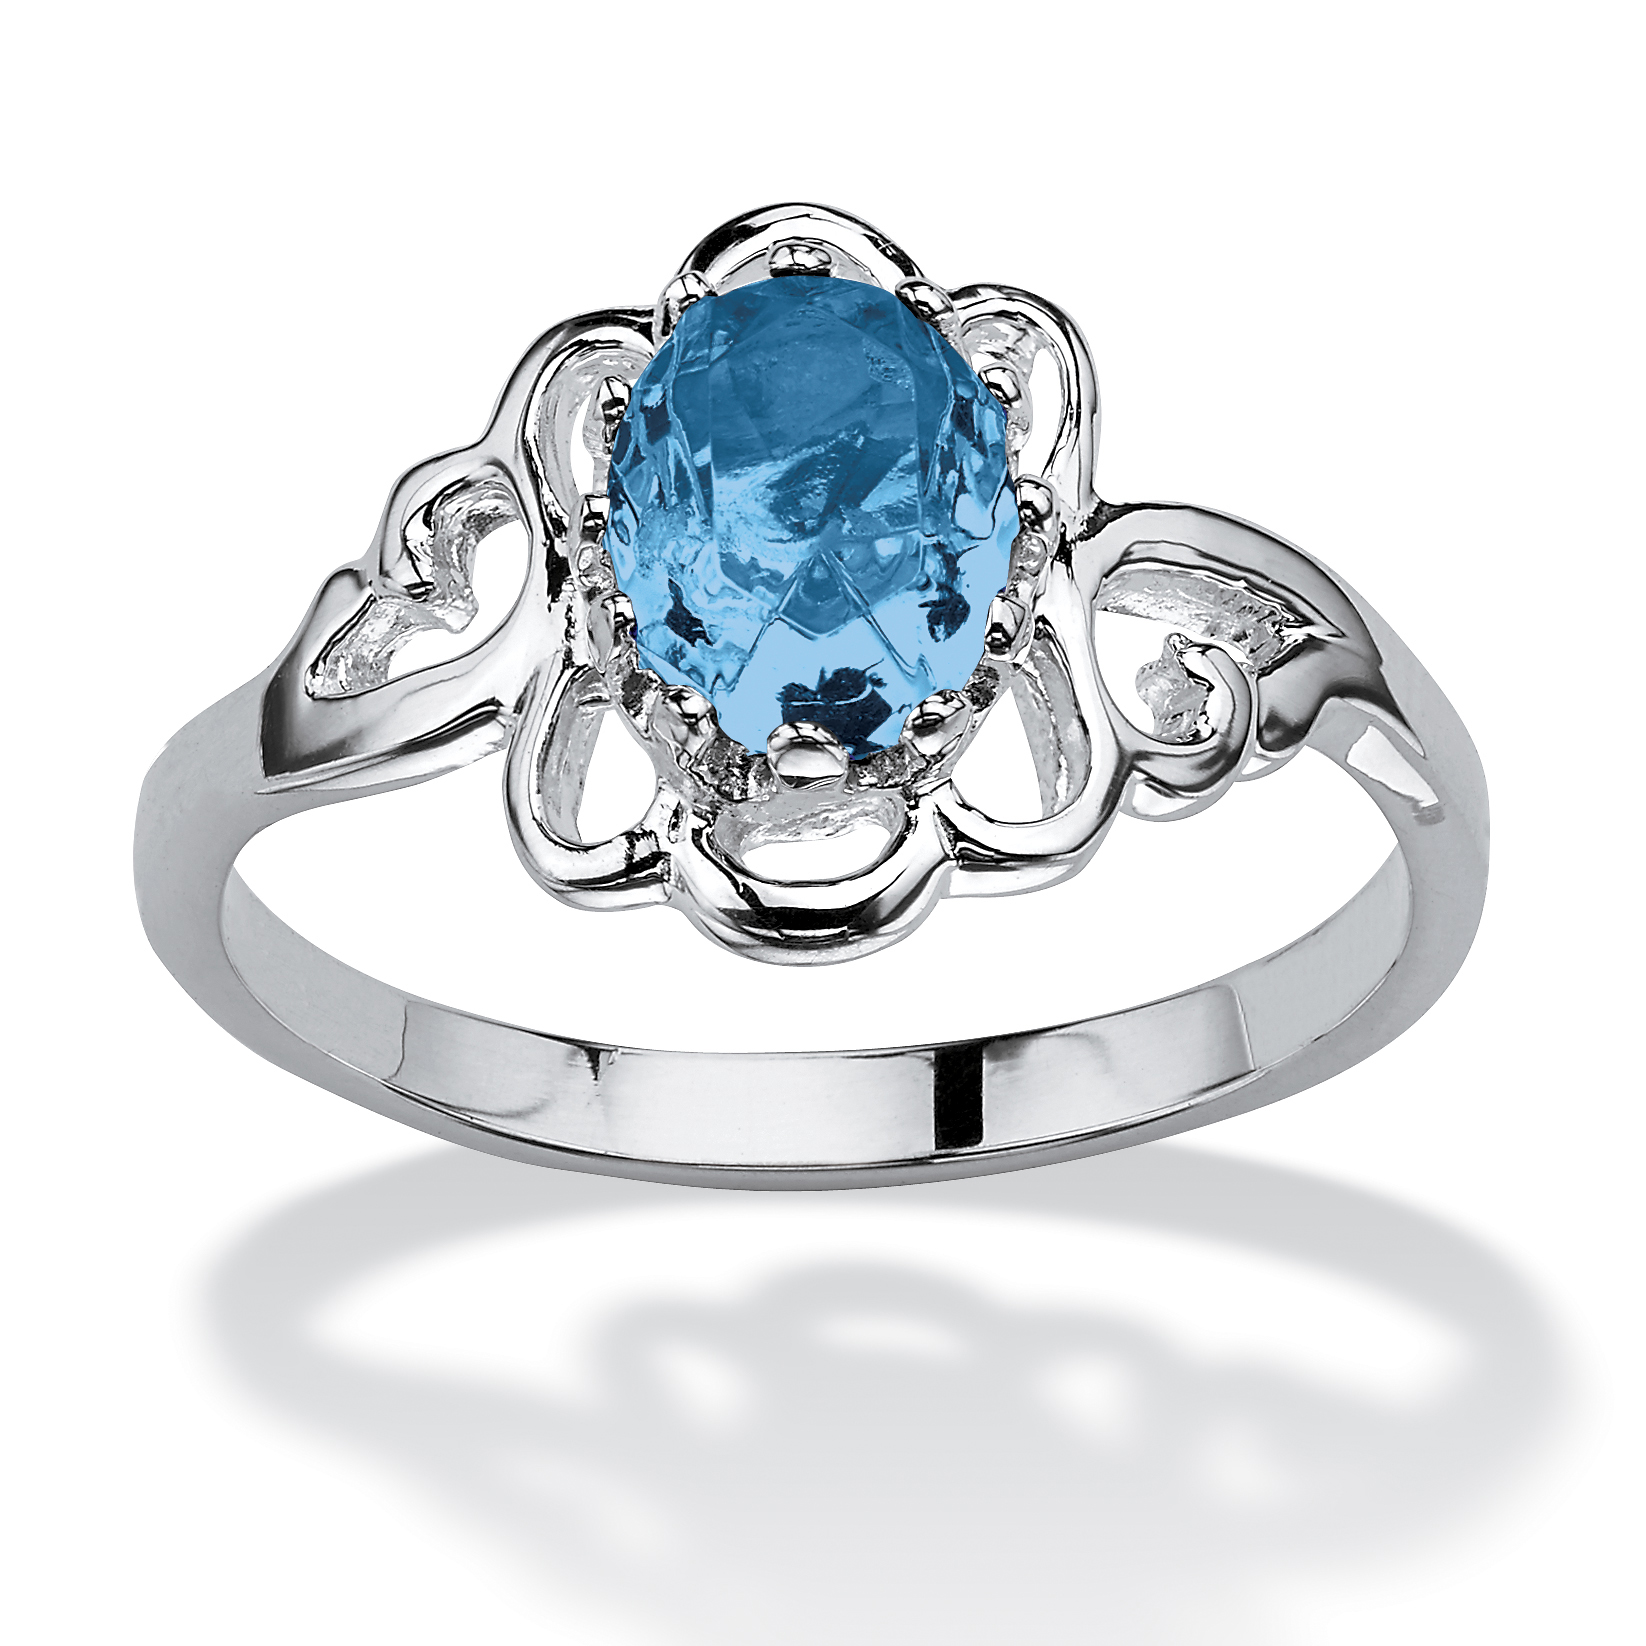 PalmBeach Jewelry Oval-Cut Open Scrollwork Simulated Birthstone Ring in Sterling Silver- March- Simulated Aquamarine